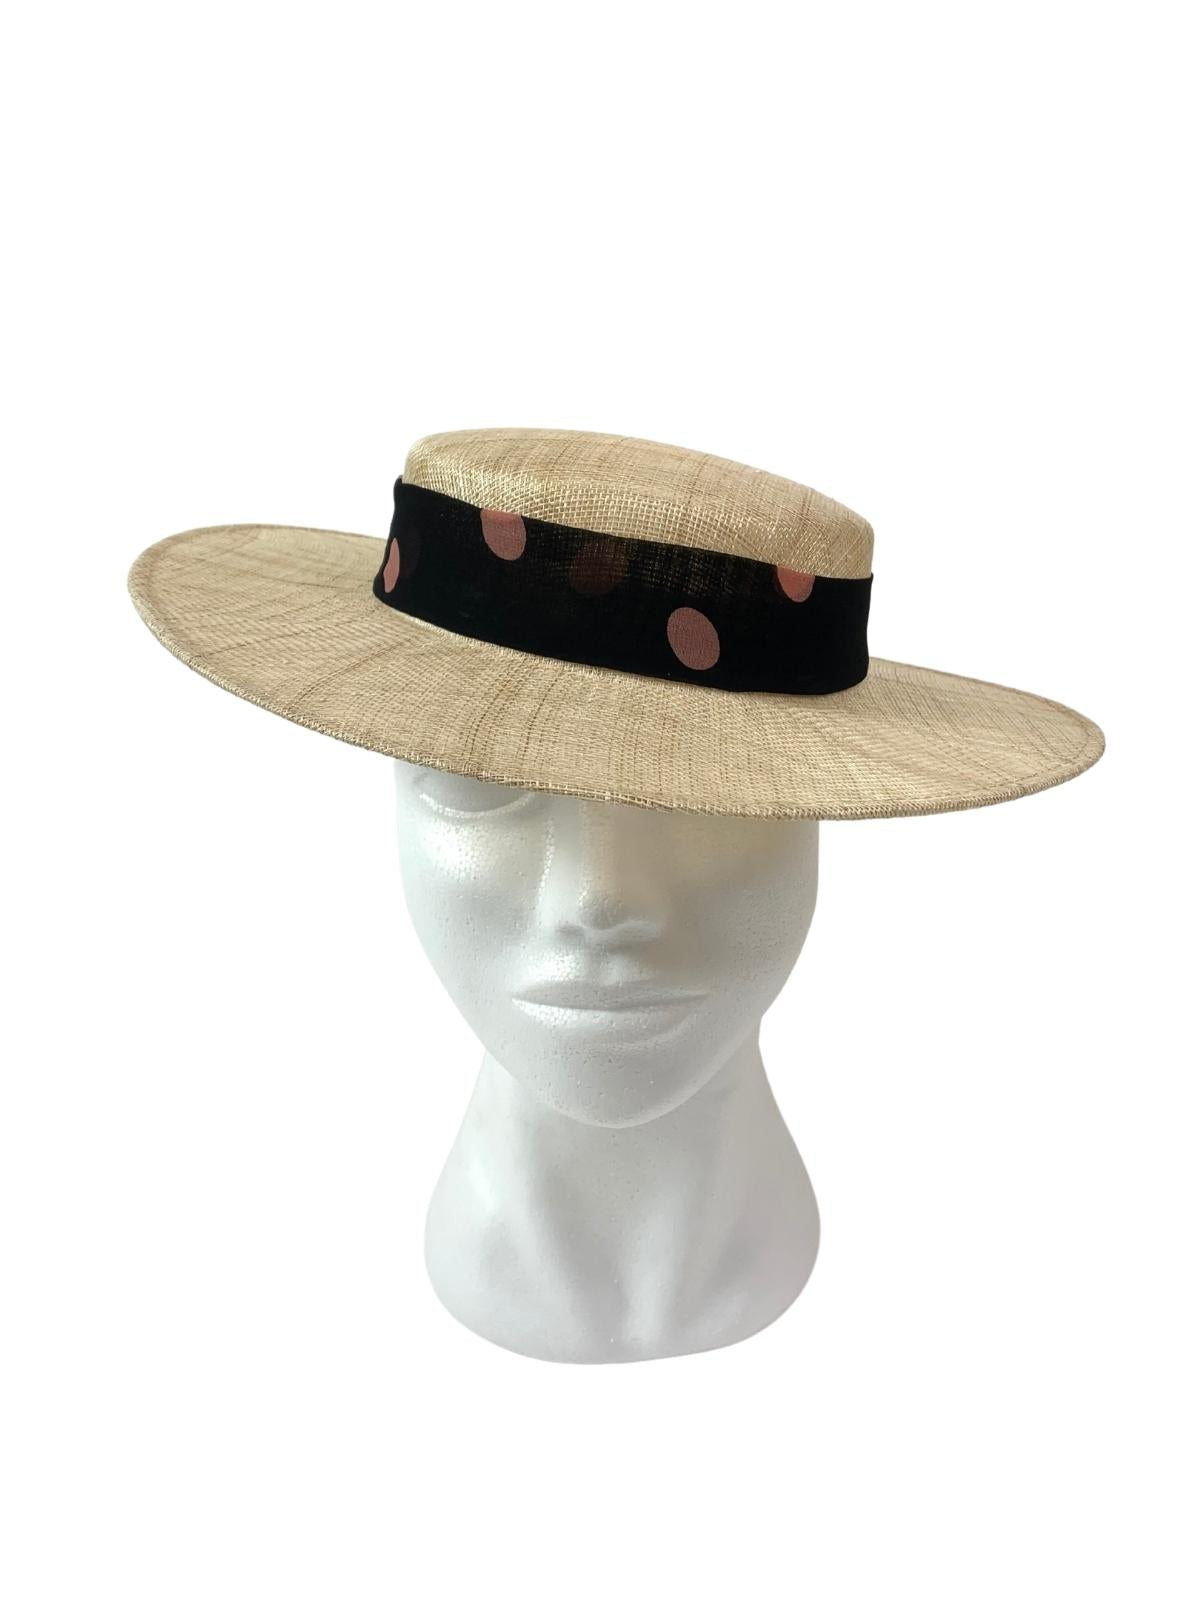 Goodwood Tie Boater Hat / Black and Blush Spot